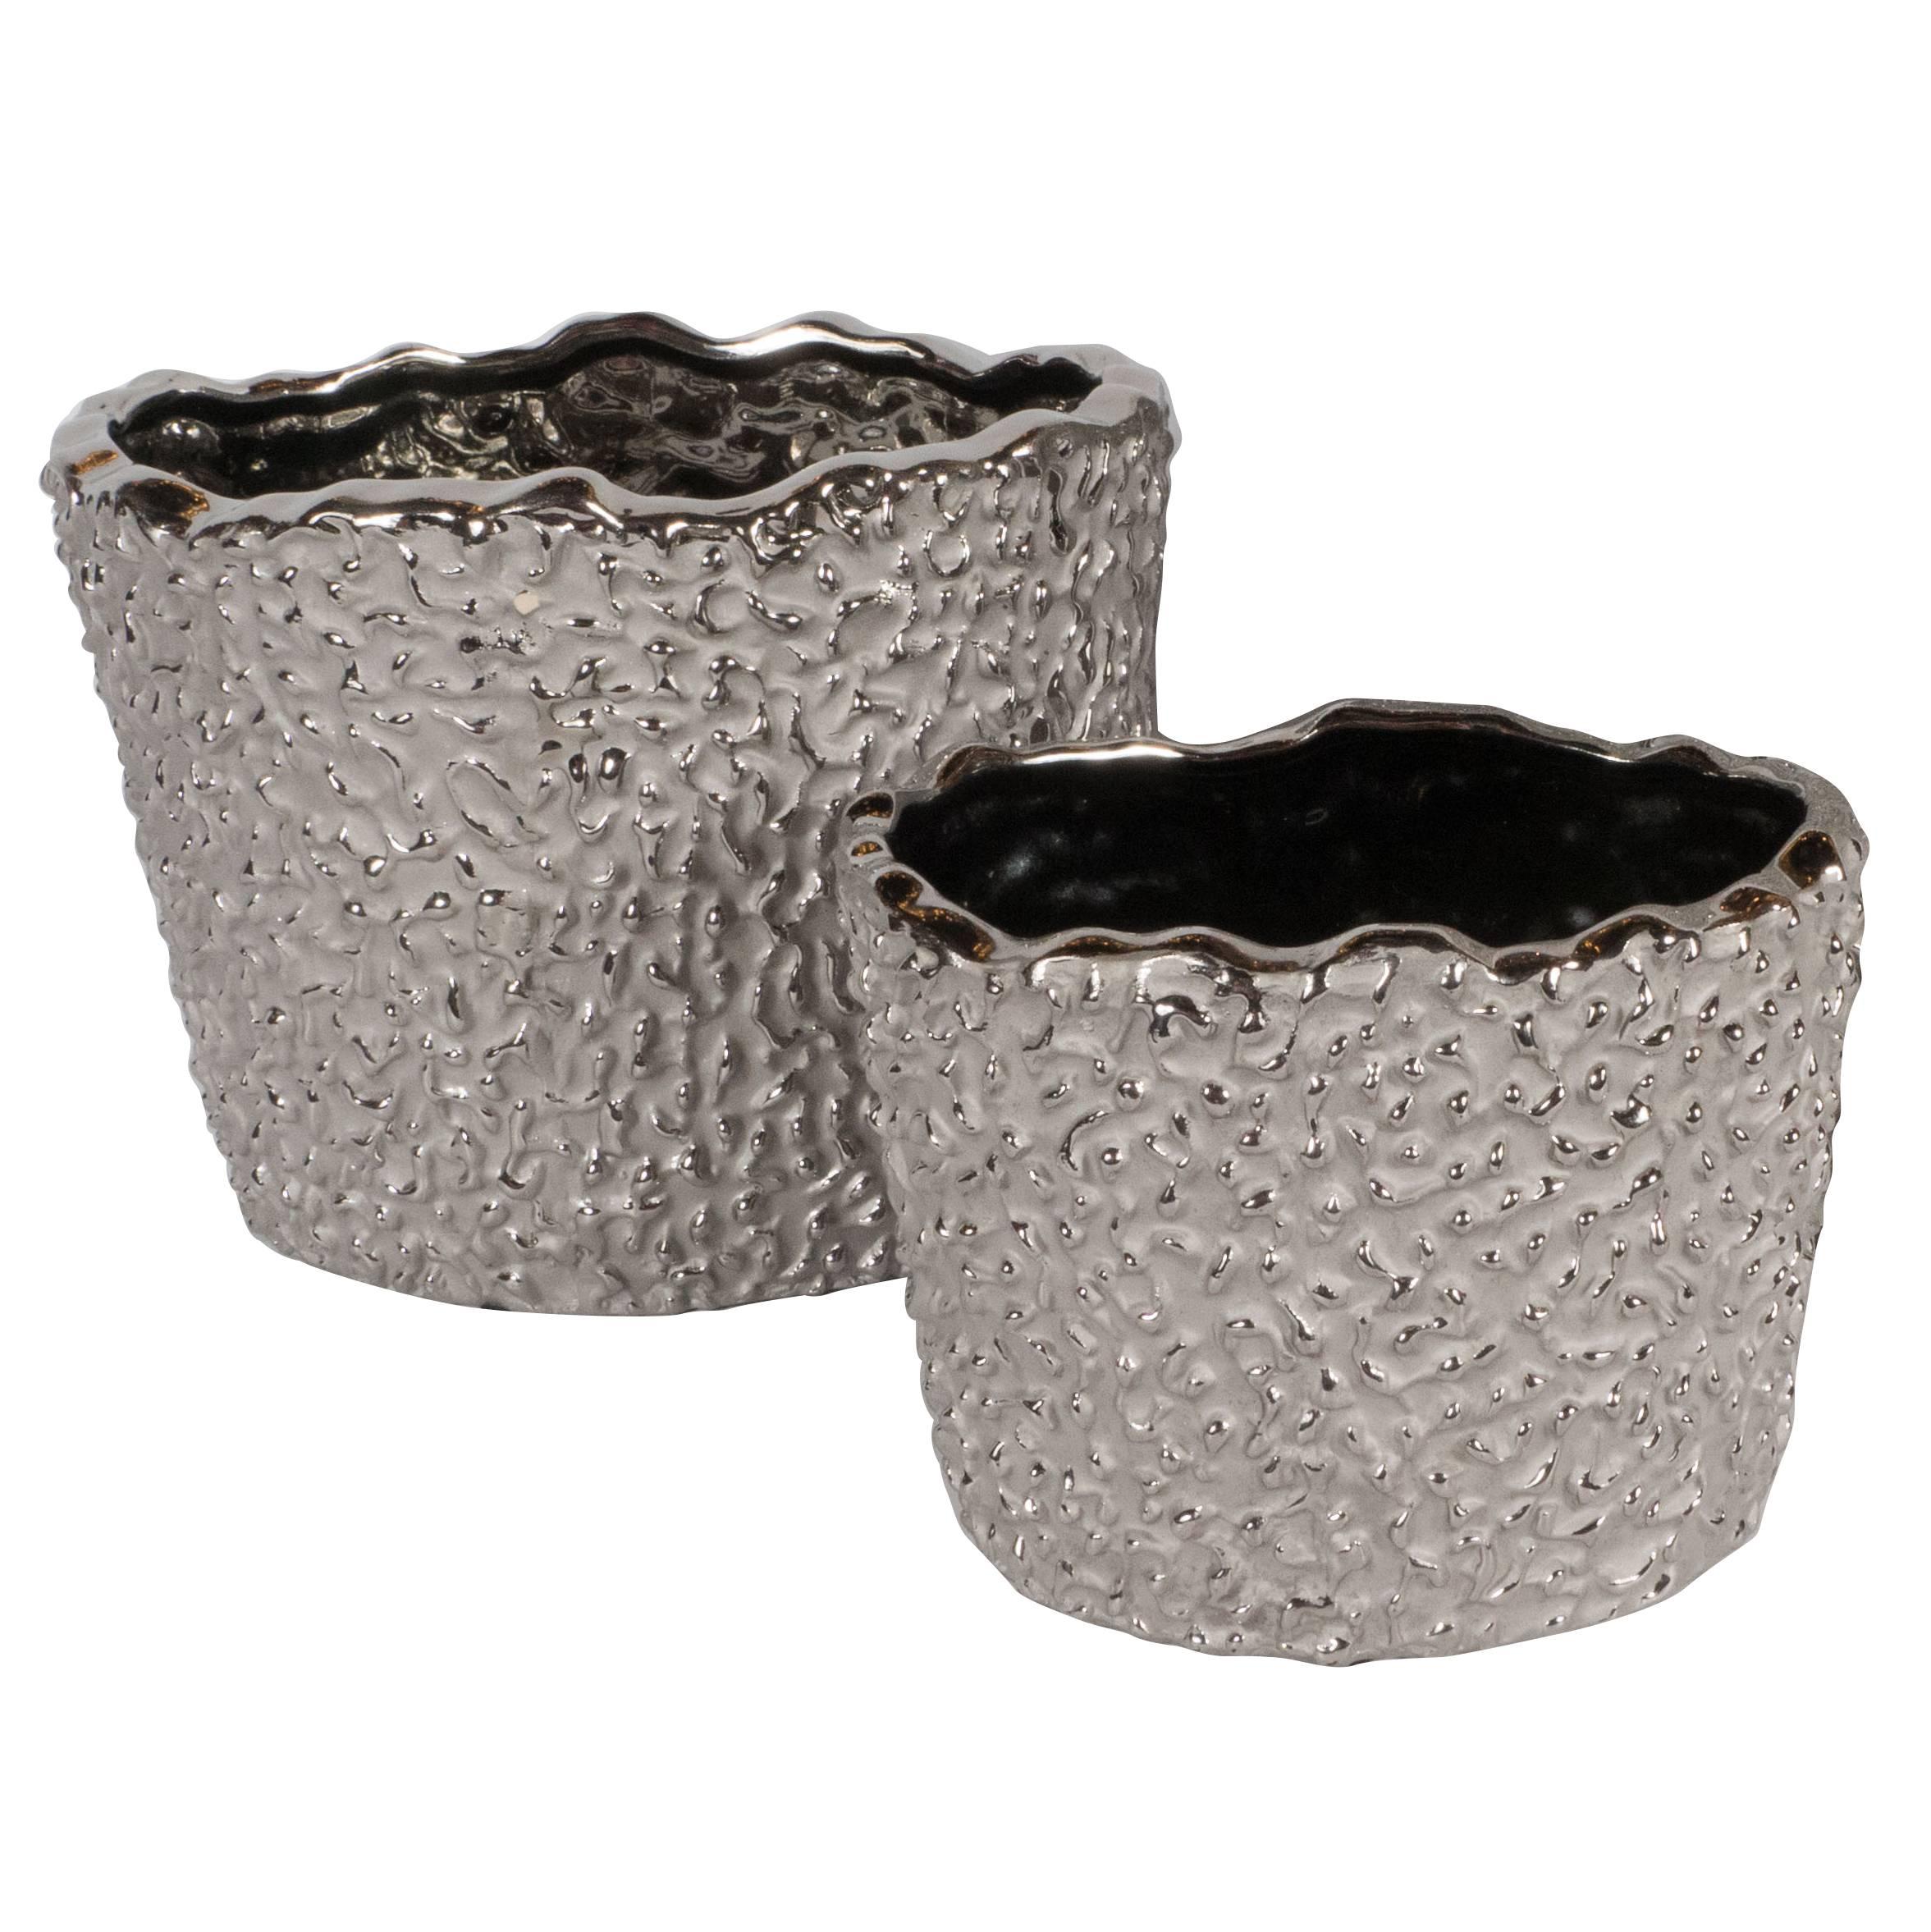 Pair of Organic Modern Handmade Ceramic Orchid Pots in White Gold